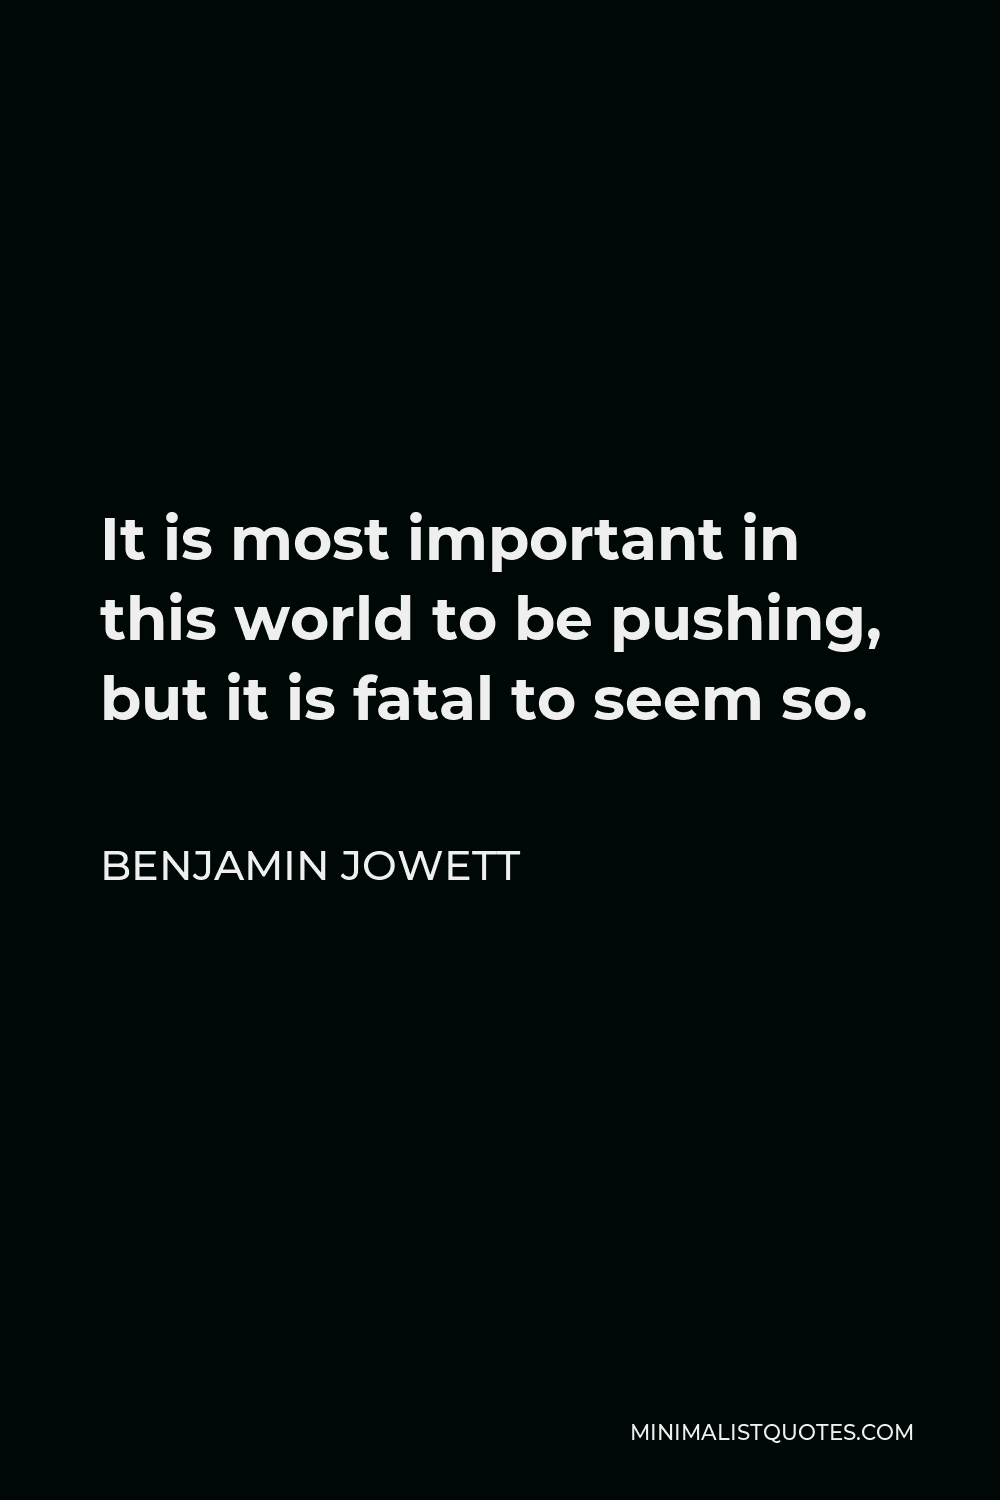 Benjamin Jowett Quote - It is most important in this world to be pushing, but it is fatal to seem so.